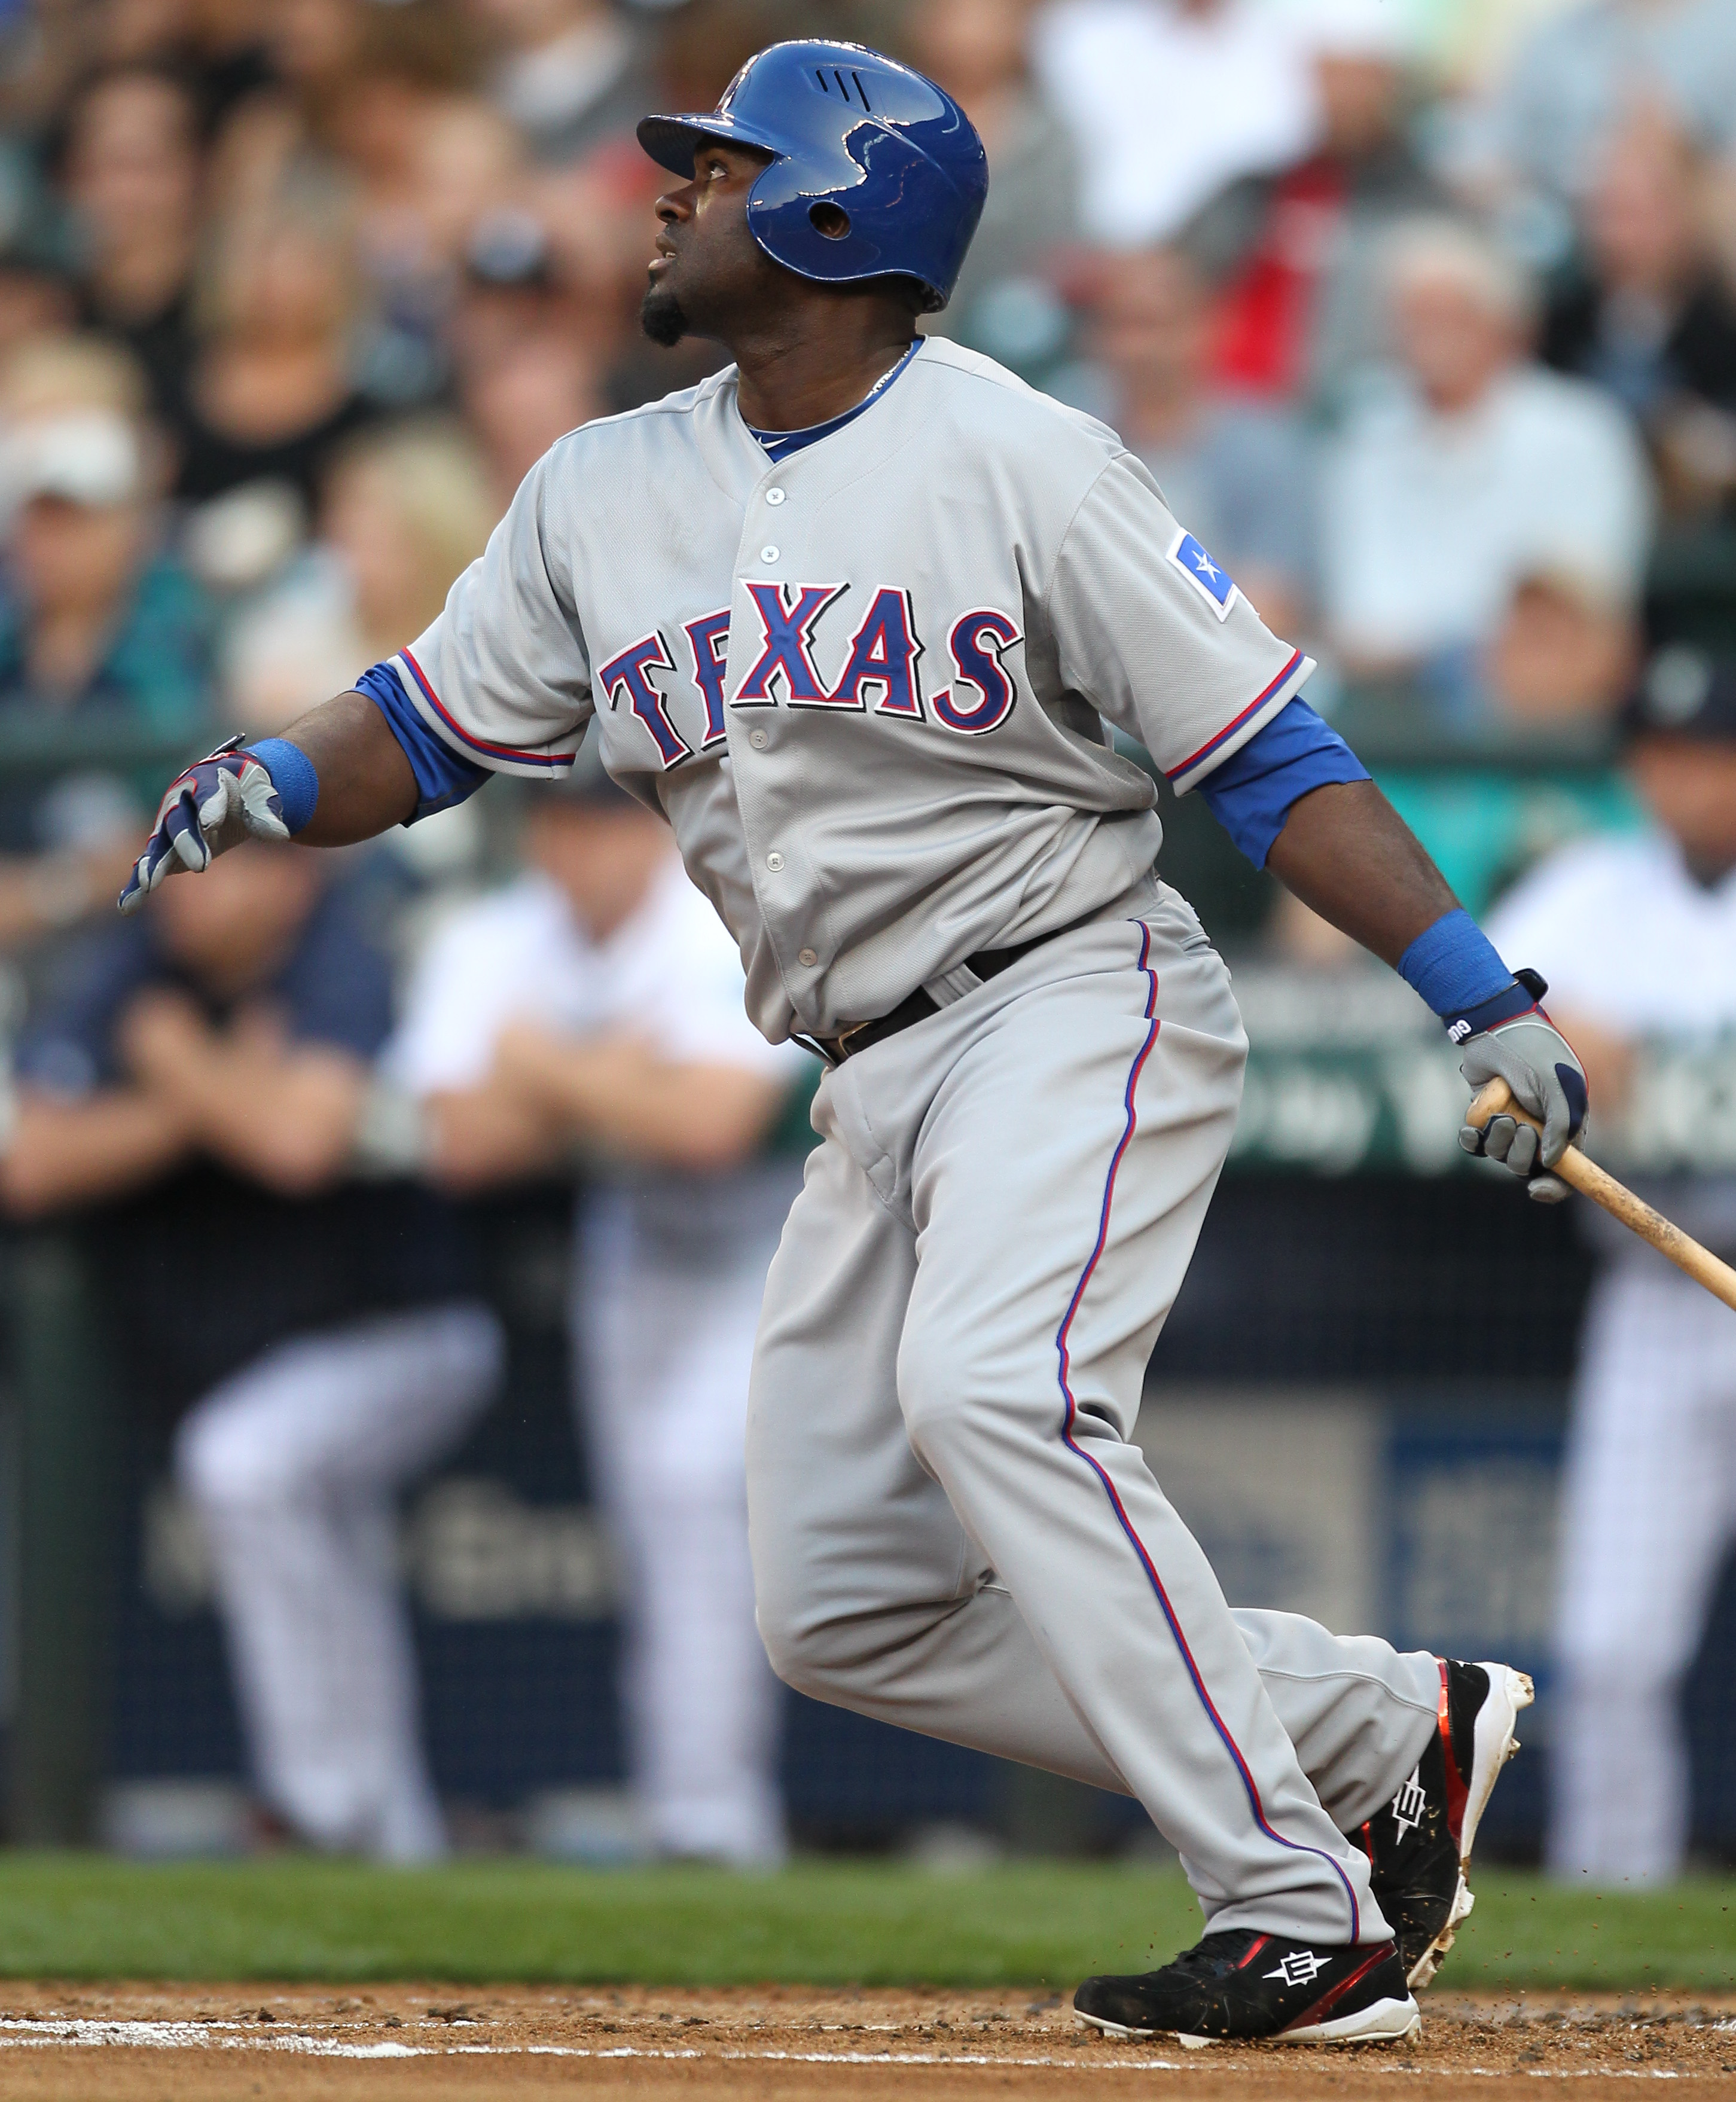 SEATTLE - AUGUST 03:  Cristian Guzman #12 of the Texas Rangers bats against the Seattle Mariners at Safeco Field on August 3, 2010 in Seattle, Washington. (Photo by Otto Greule Jr/Getty Images)